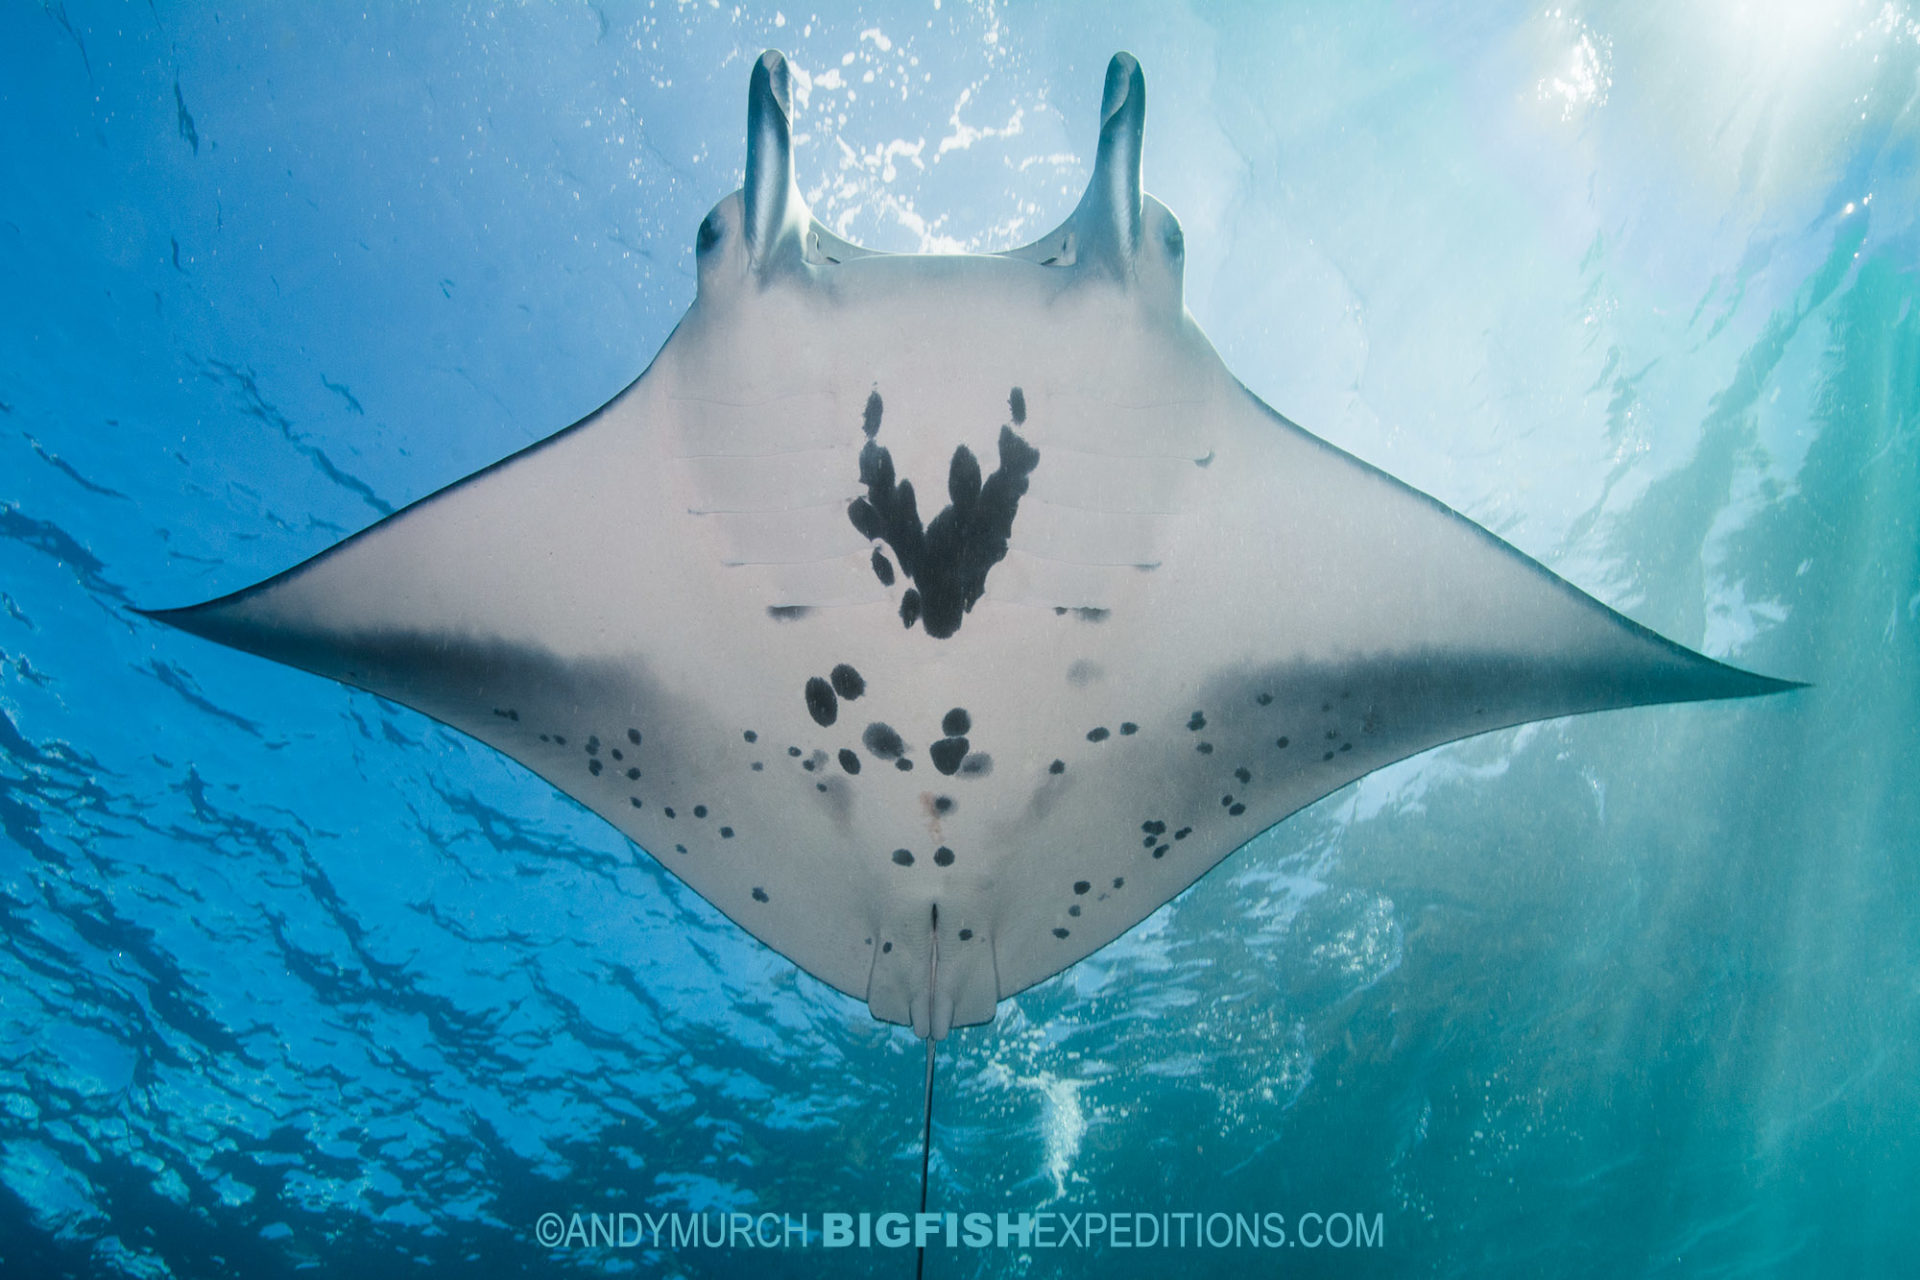 Diving with manta rays in Nuku Hiva